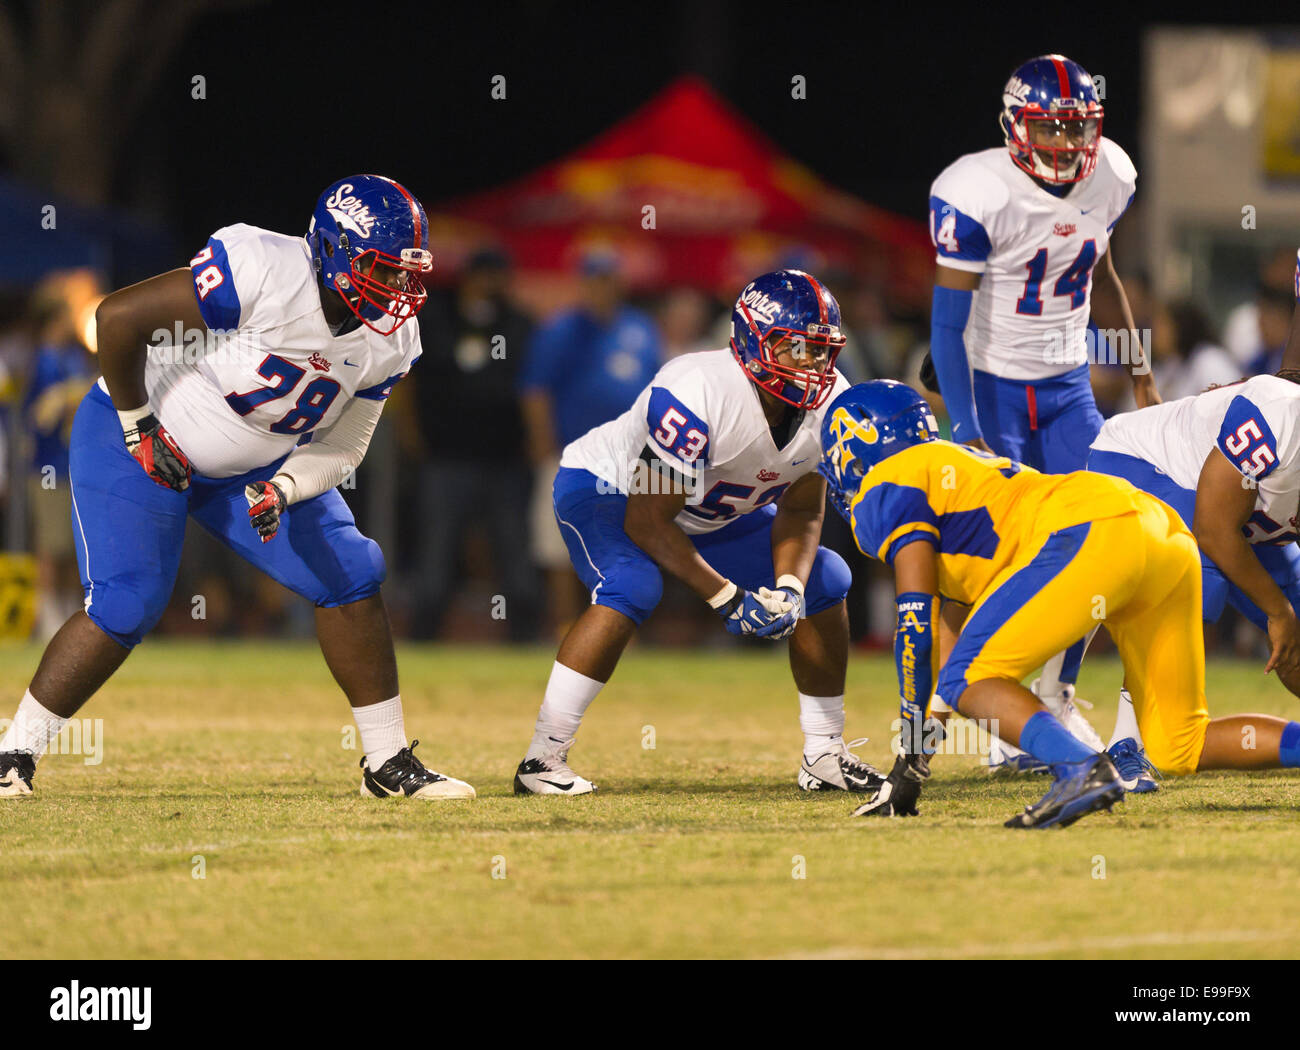 October 4, 2014, La Puente, CA.Gardena Serra cavaliers offenisve line (53) Steven Winn in action during the Bishop Amat upset of the Cavaliers at Bishop Amat high school on October 3, 2014. The Cavaliers who are usually a nationally ranked high school football team, were upset by Bishop Amat 14 - 7. (Mandatory Credit: Ed Ruvalcaba/MarinMedia.org/Cal Sport Media) (Complete photographer, and company credit required) Stock Photo